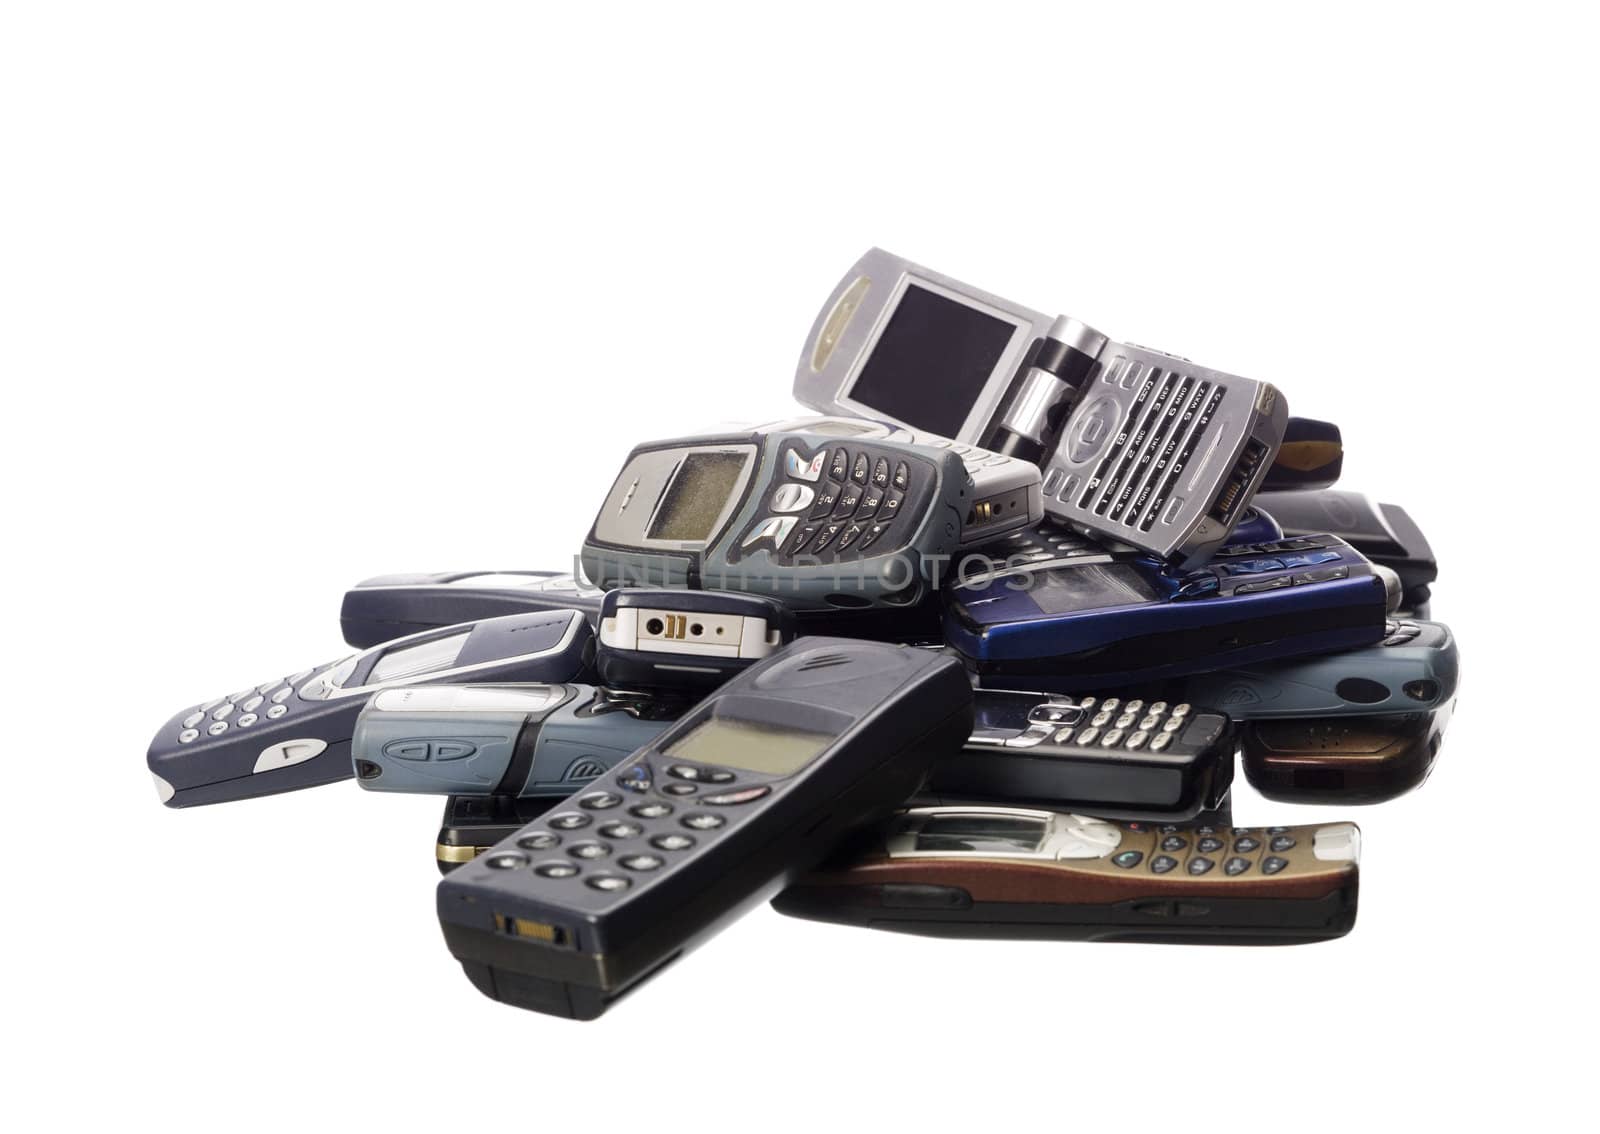 Stack of cellphones